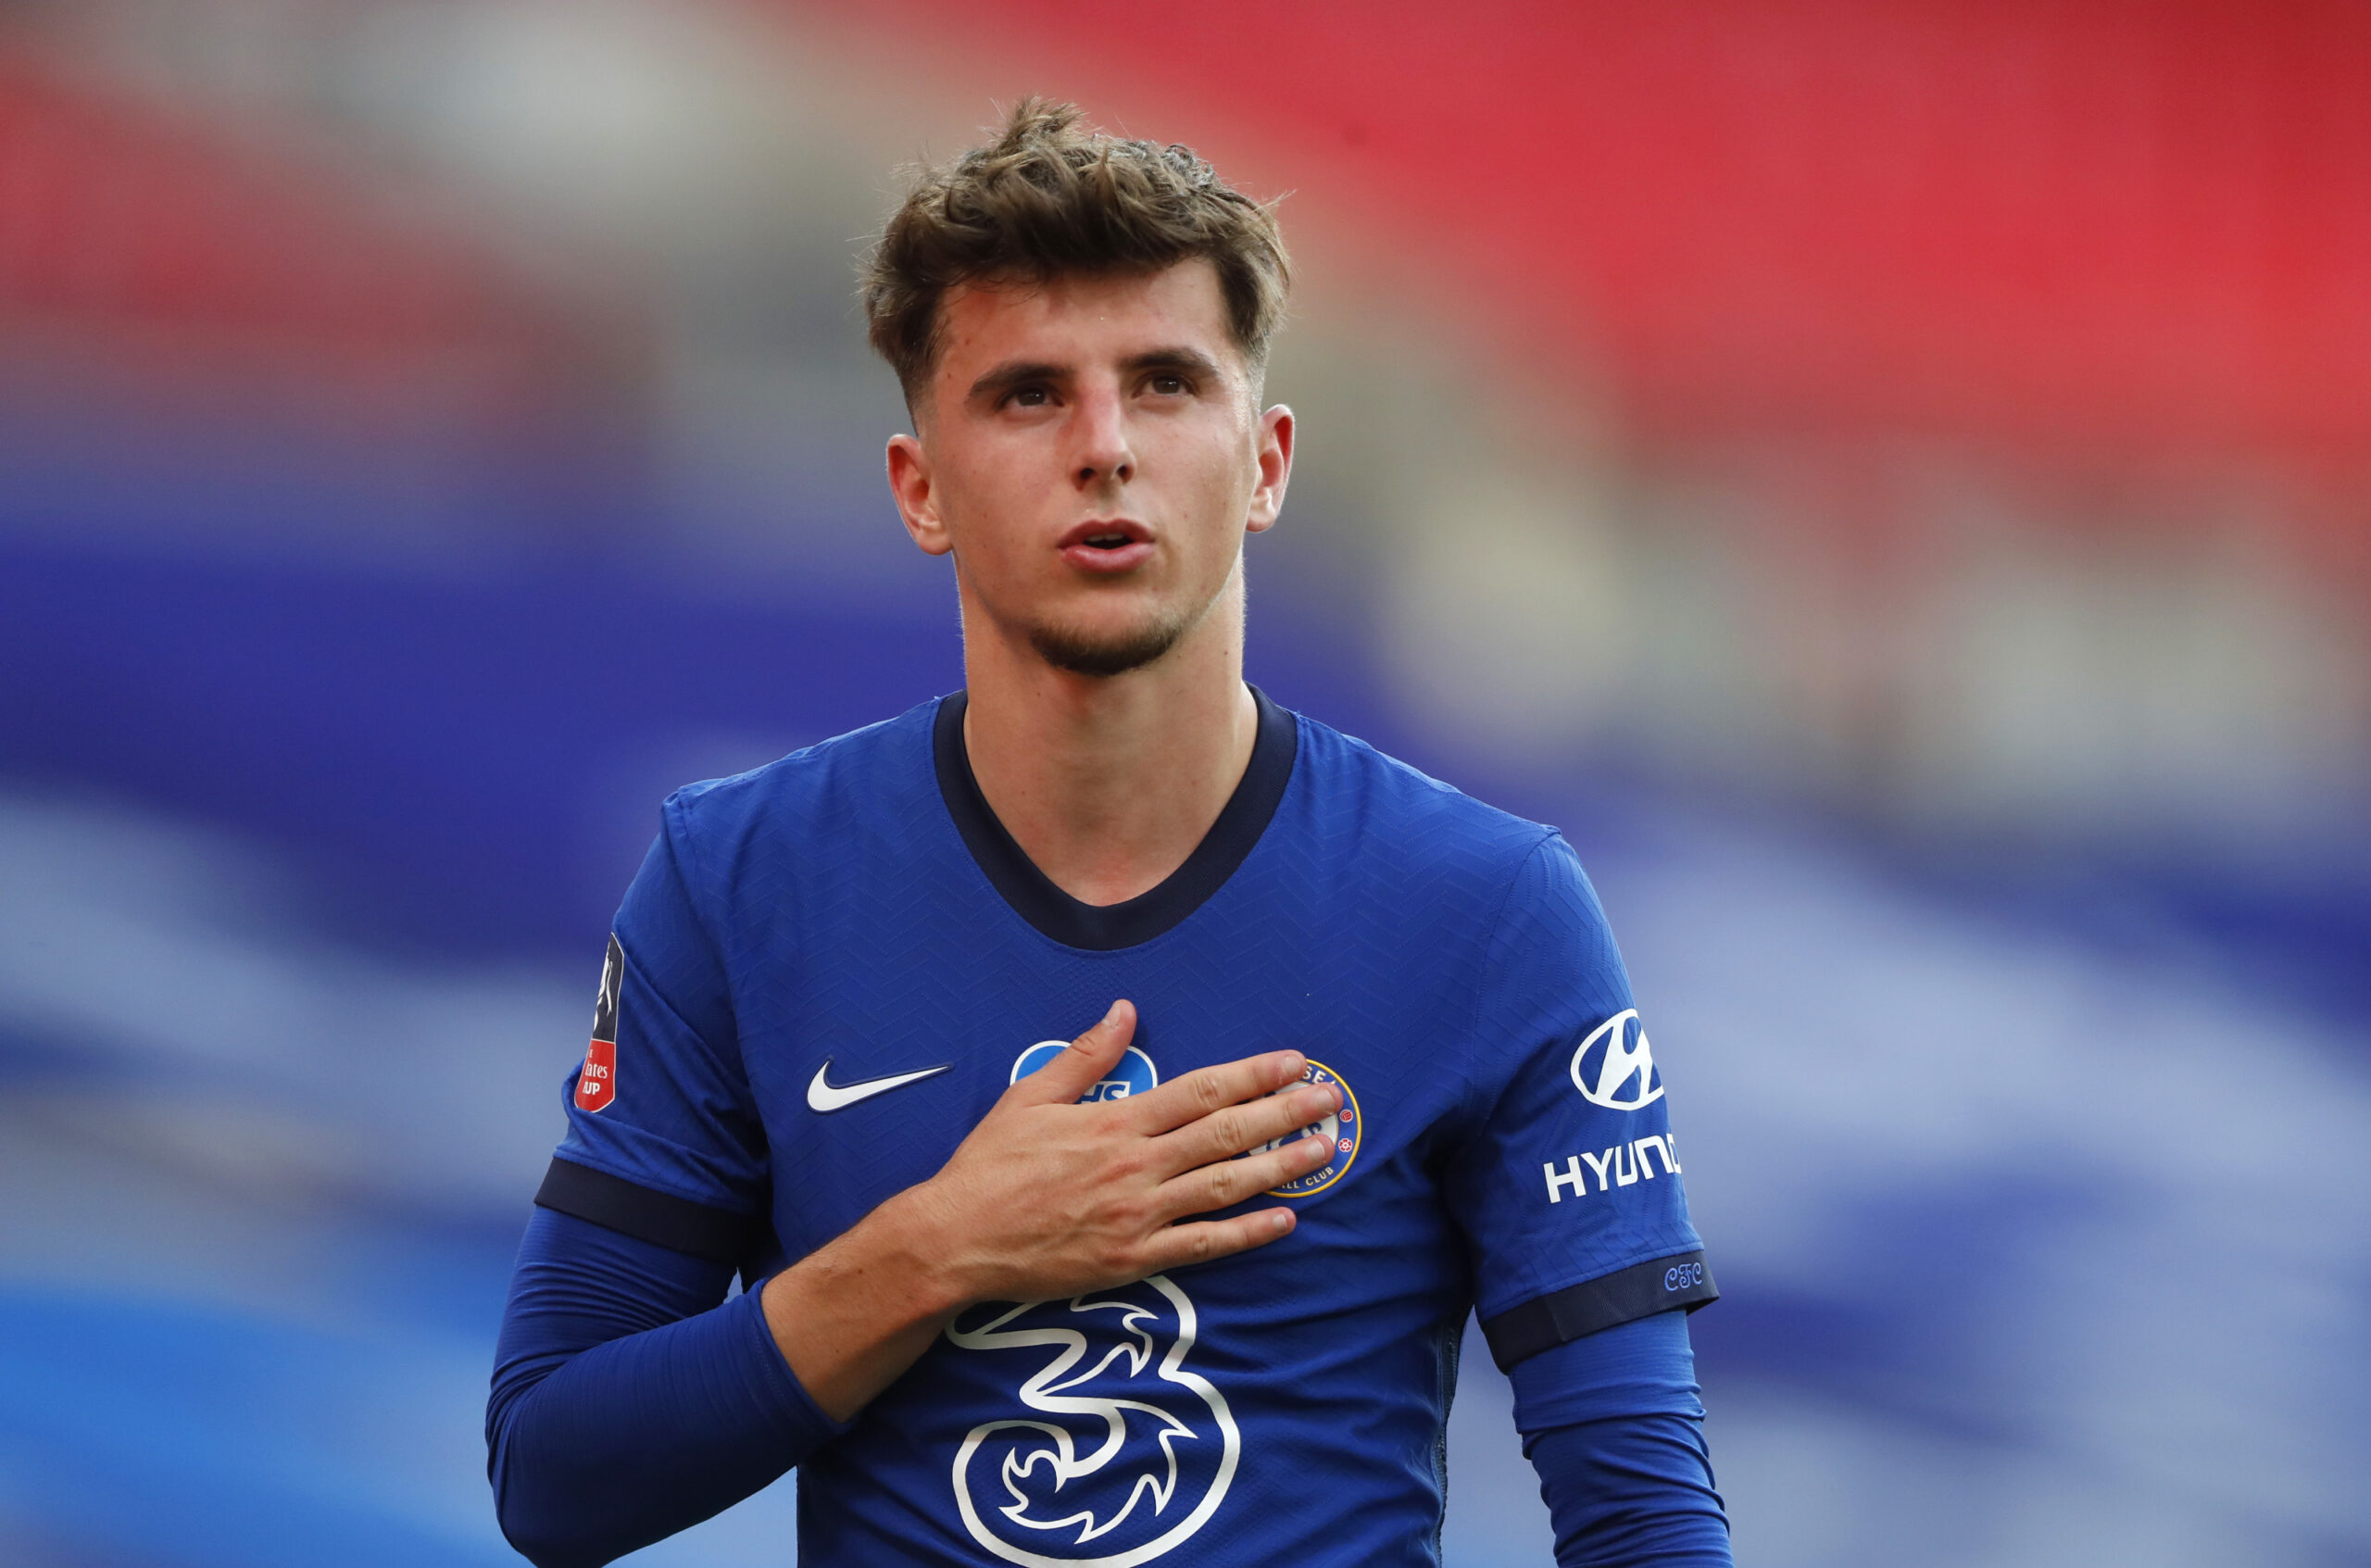 Mason Mount's salary, net worth, age, girlfriend, Career and much more